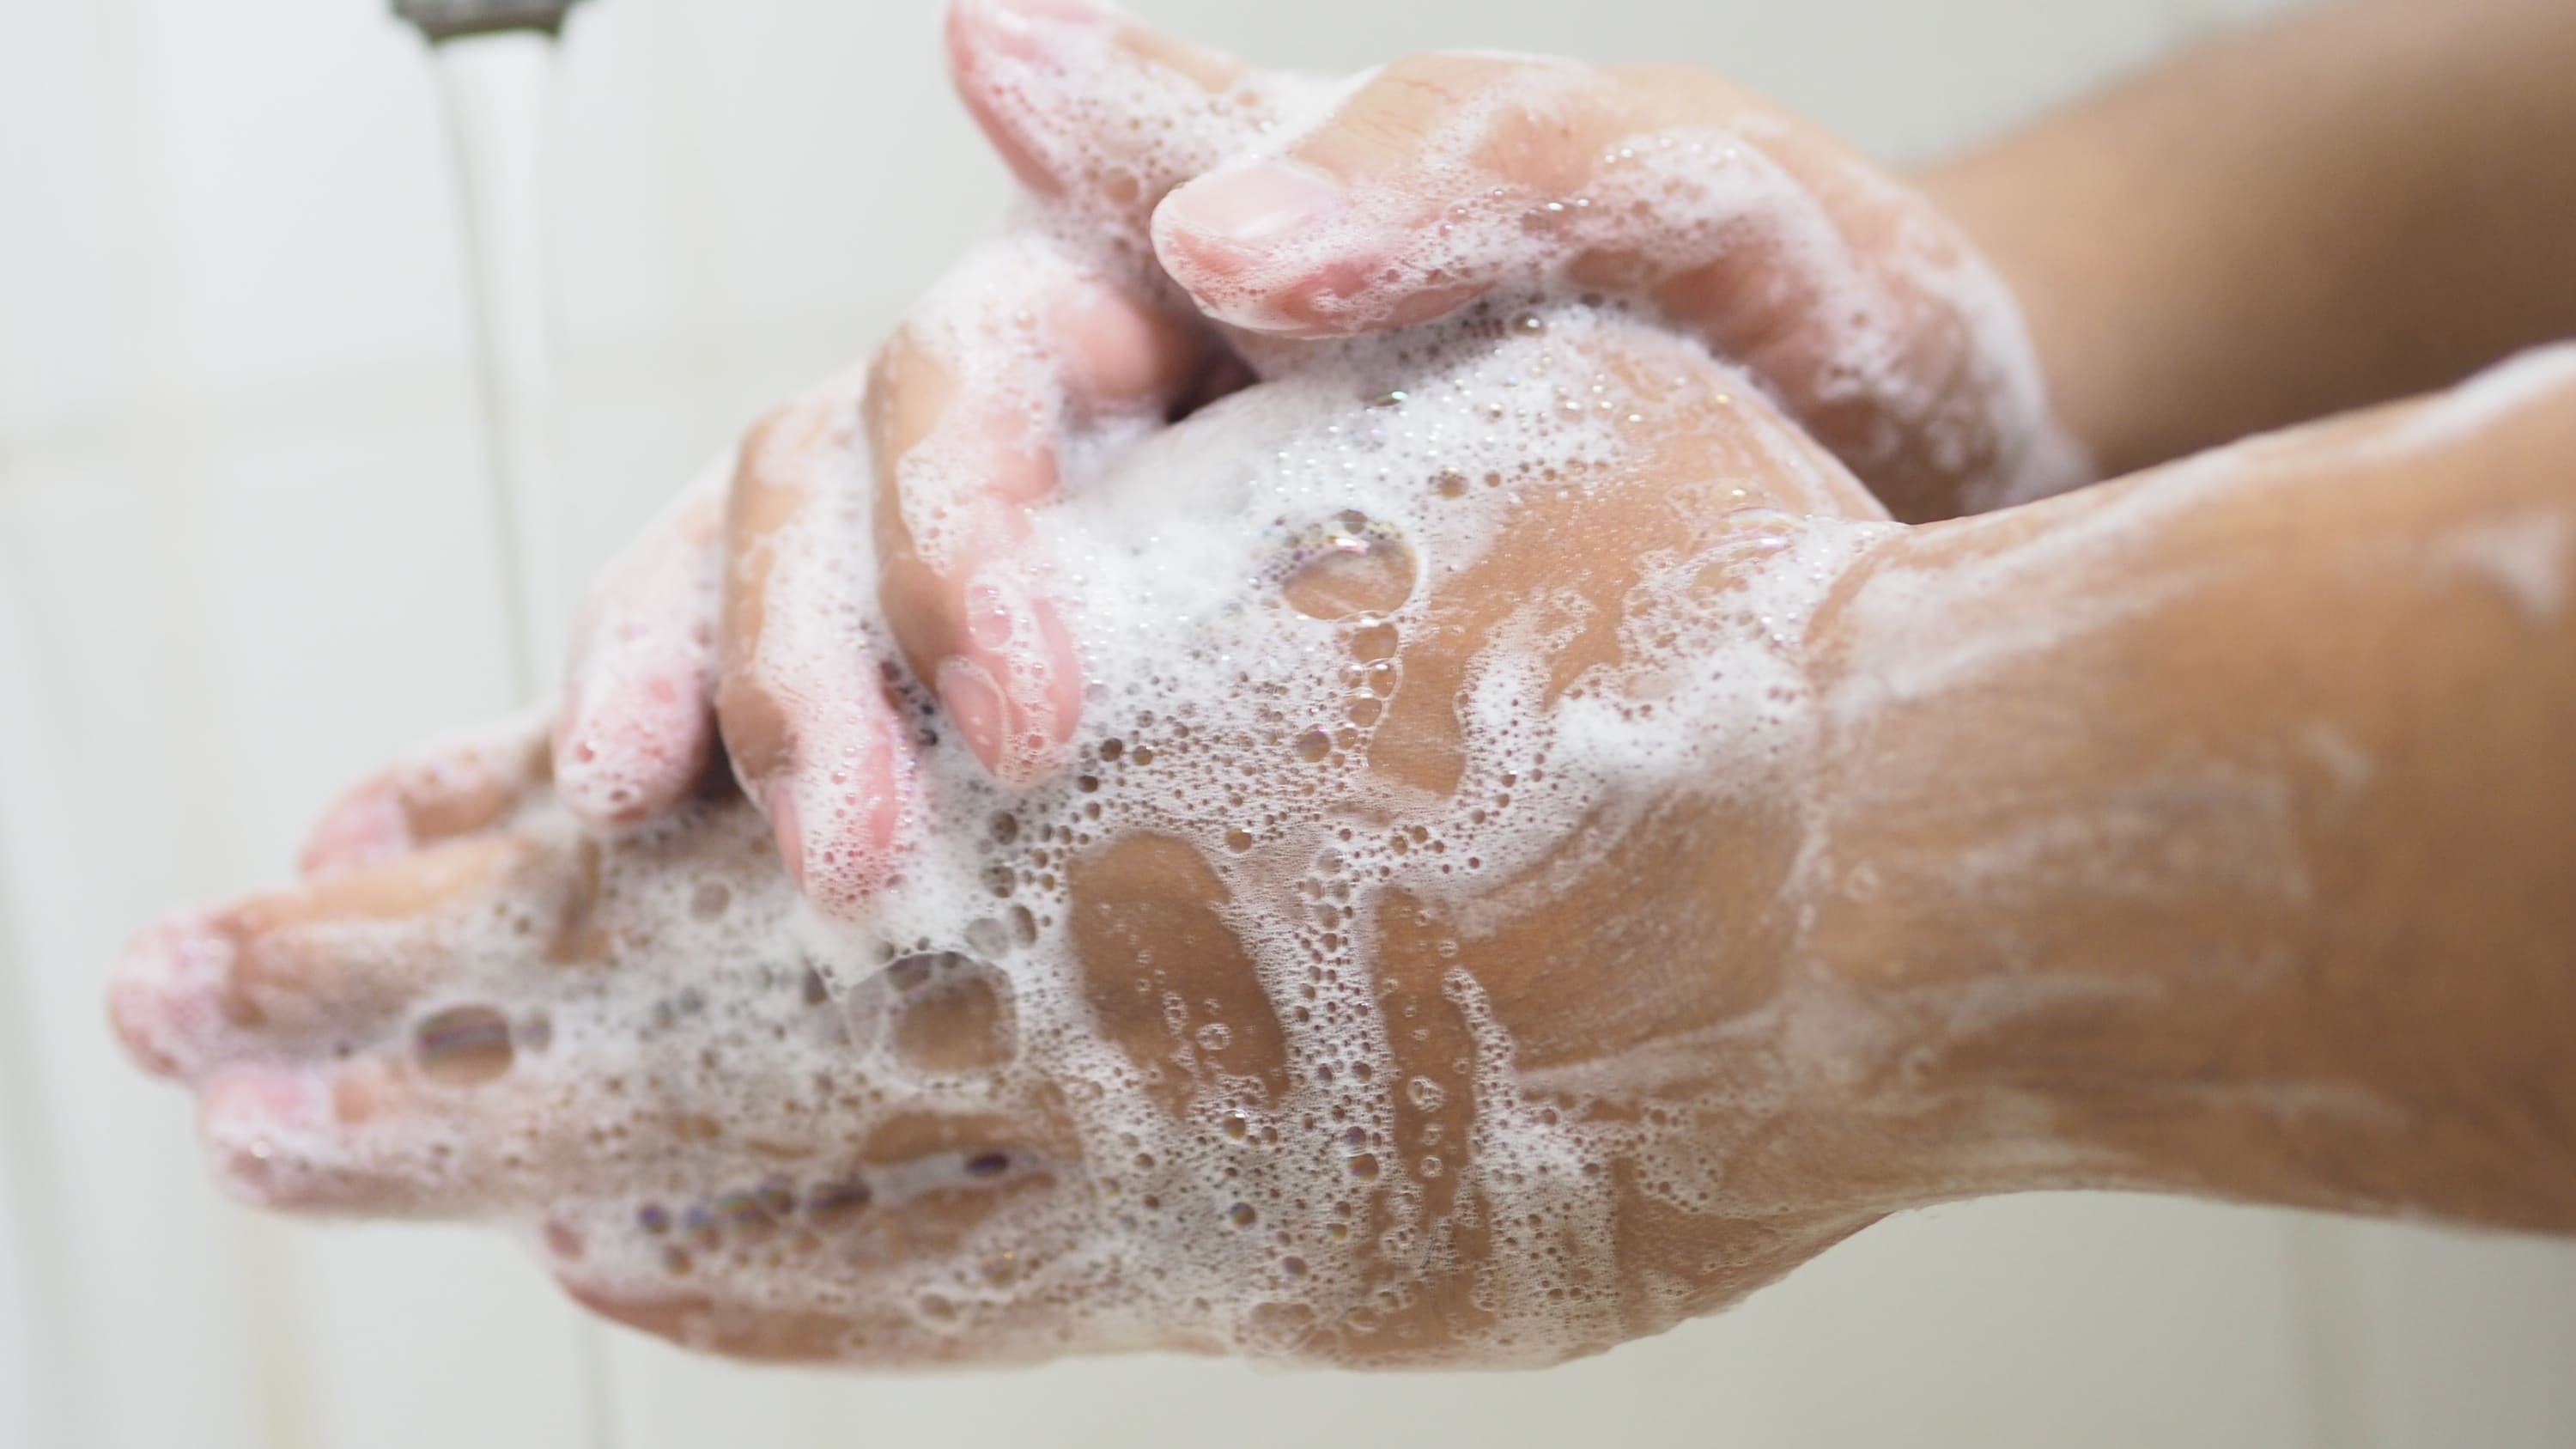 washing hands to prevent spread of COVID-19